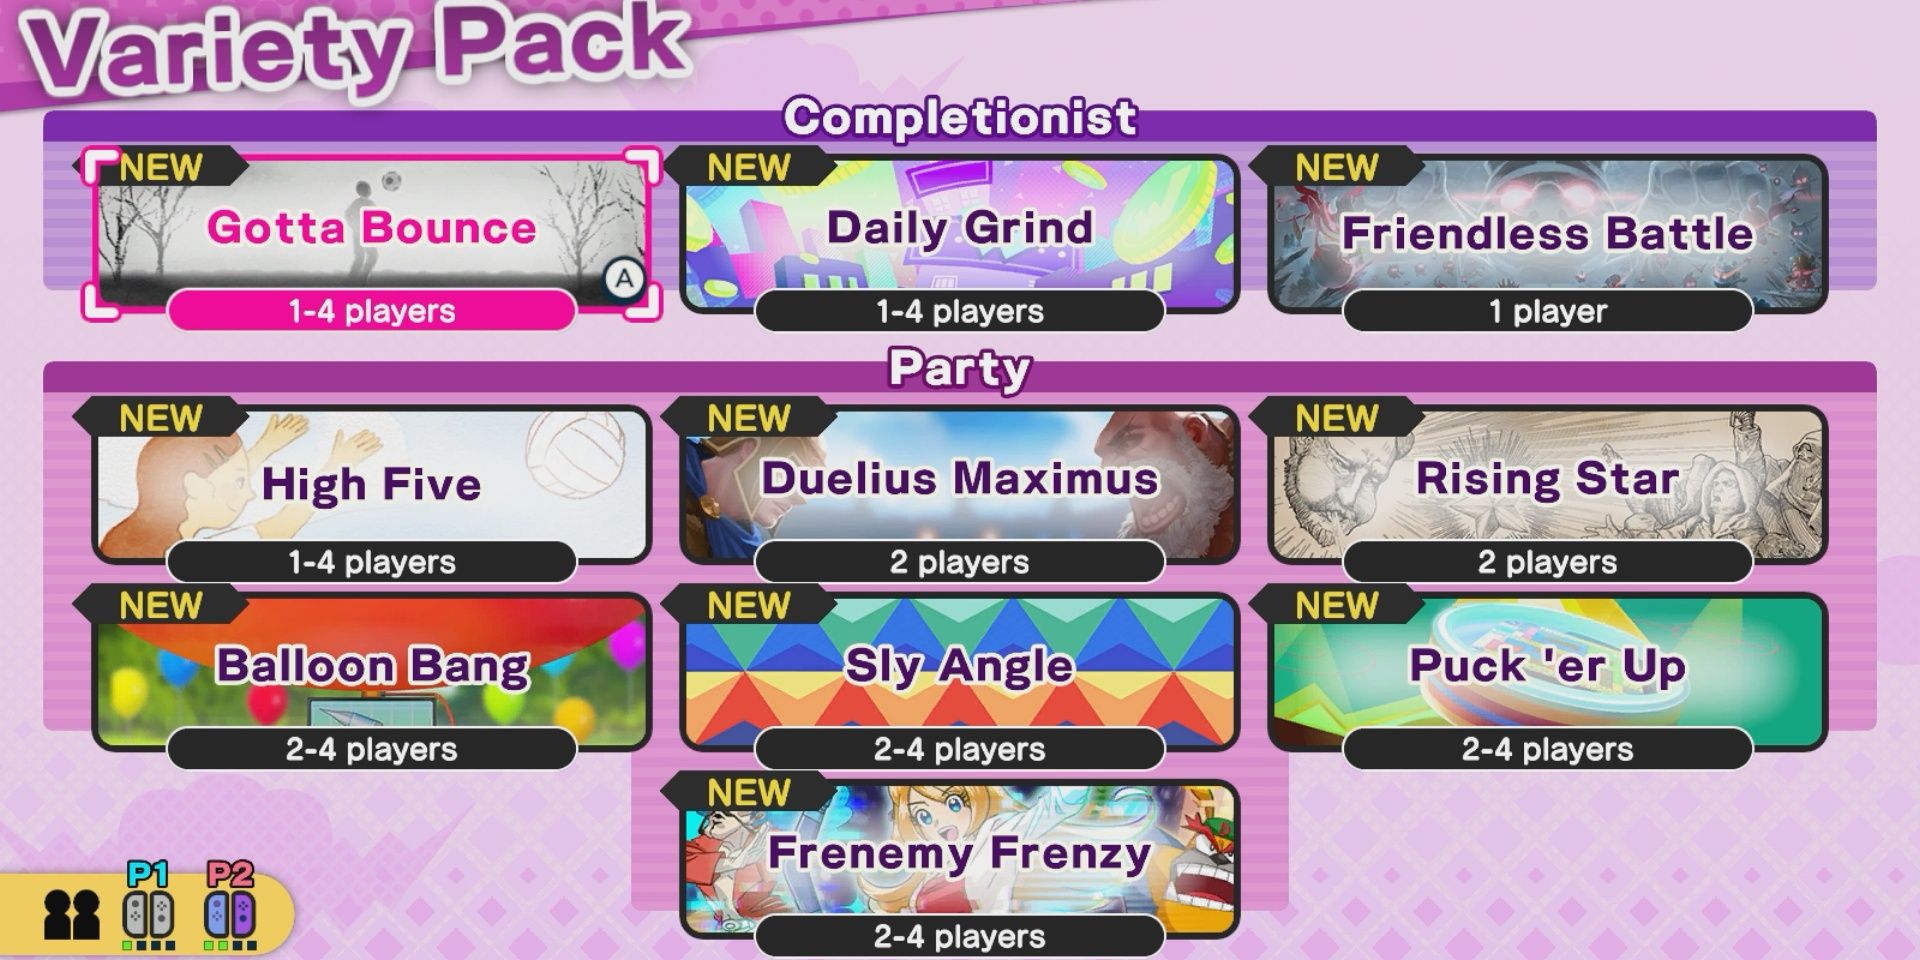 The Variety Pack in WarioWare Get It Together